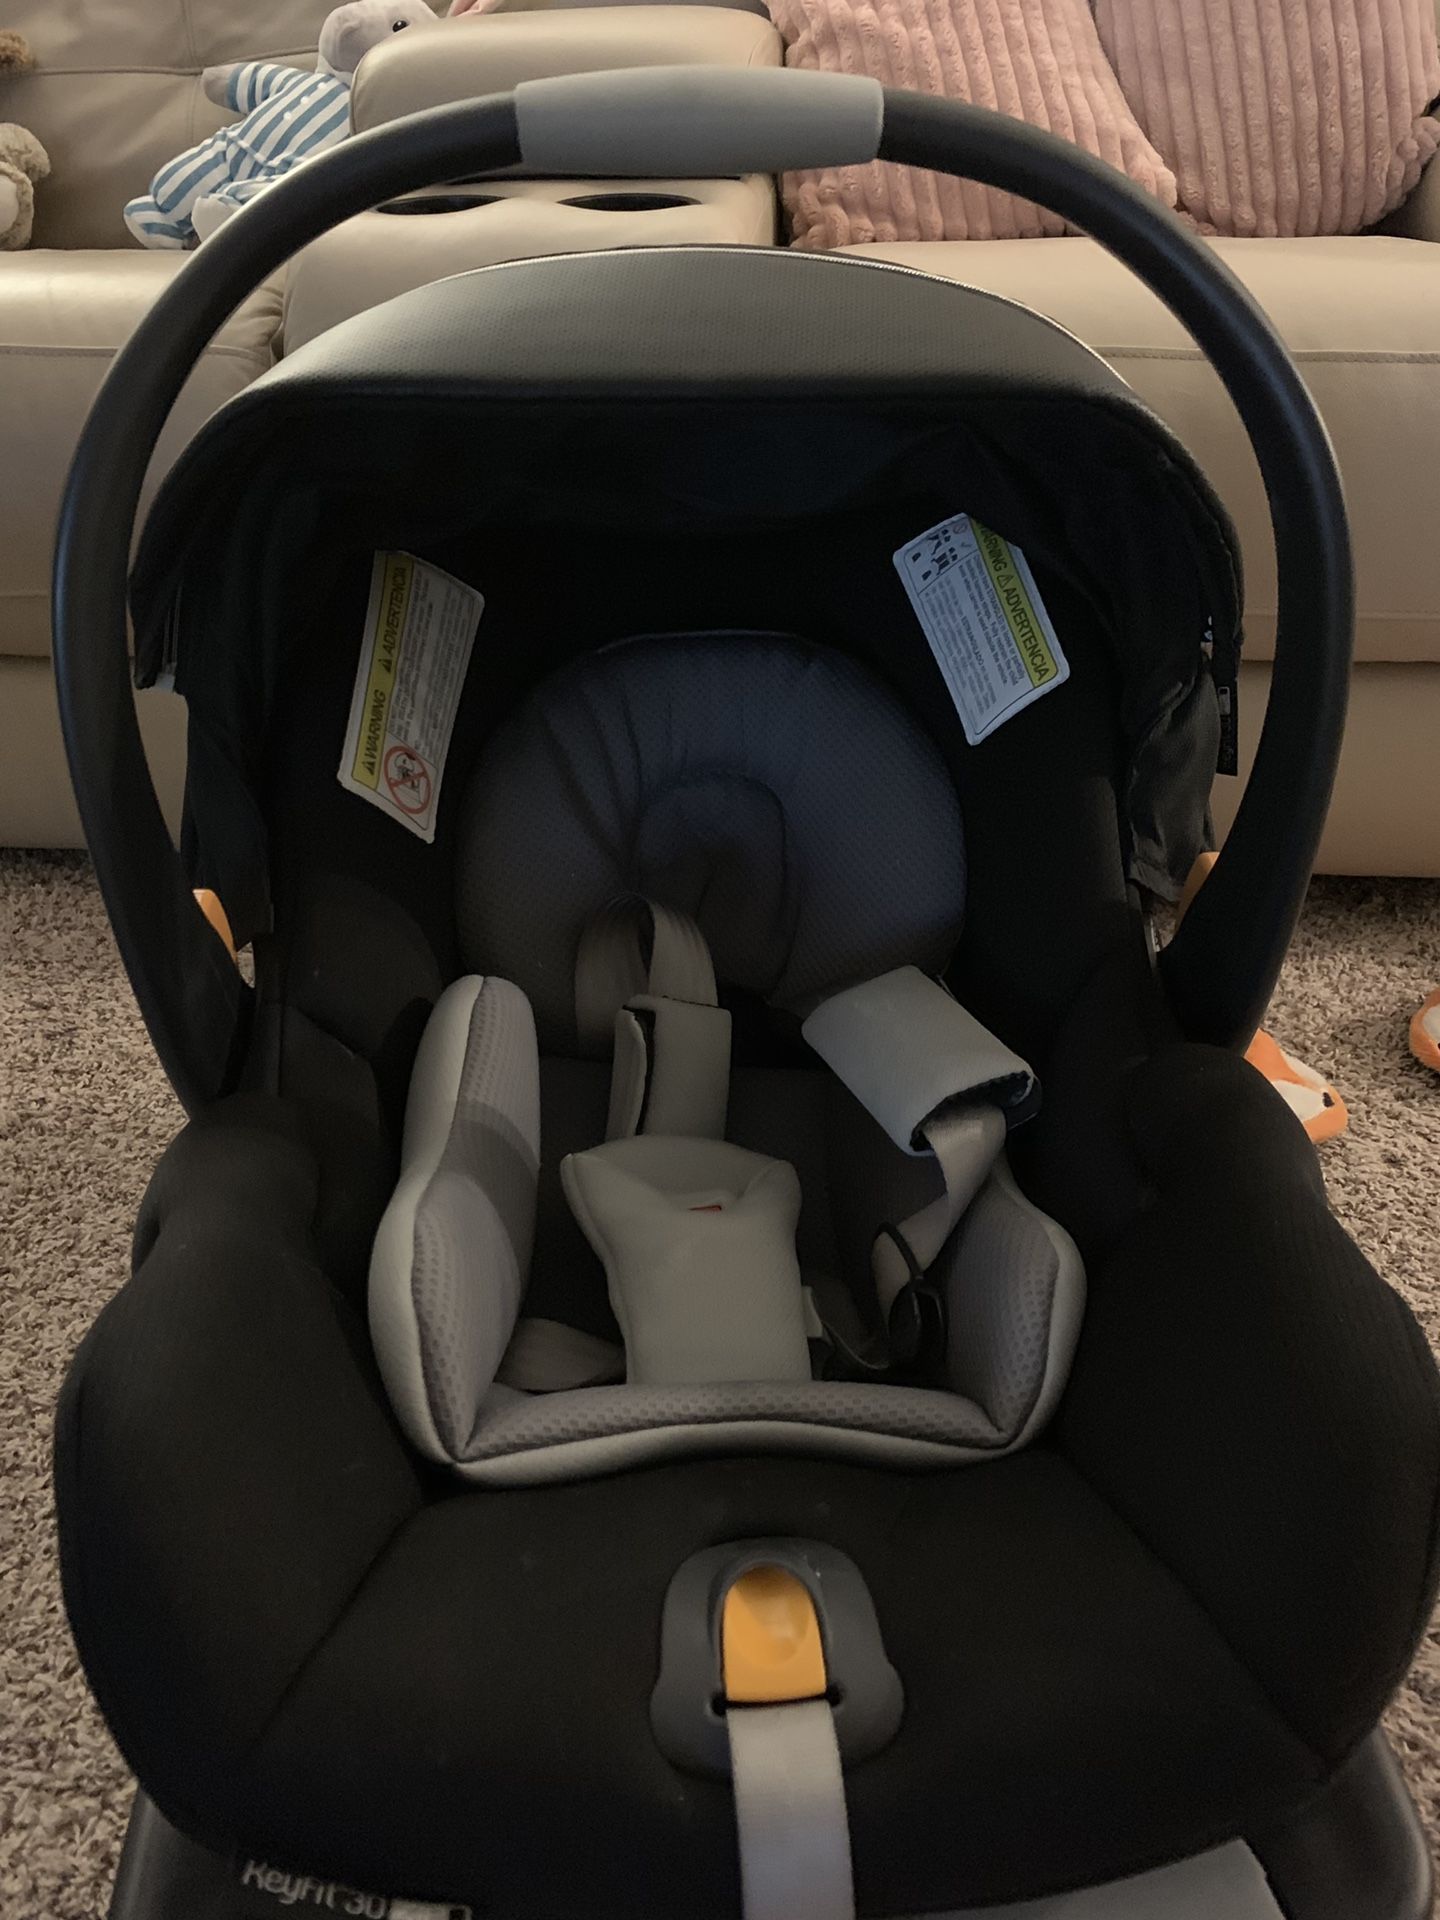 Chicco car seat brand new. Retail price is $230